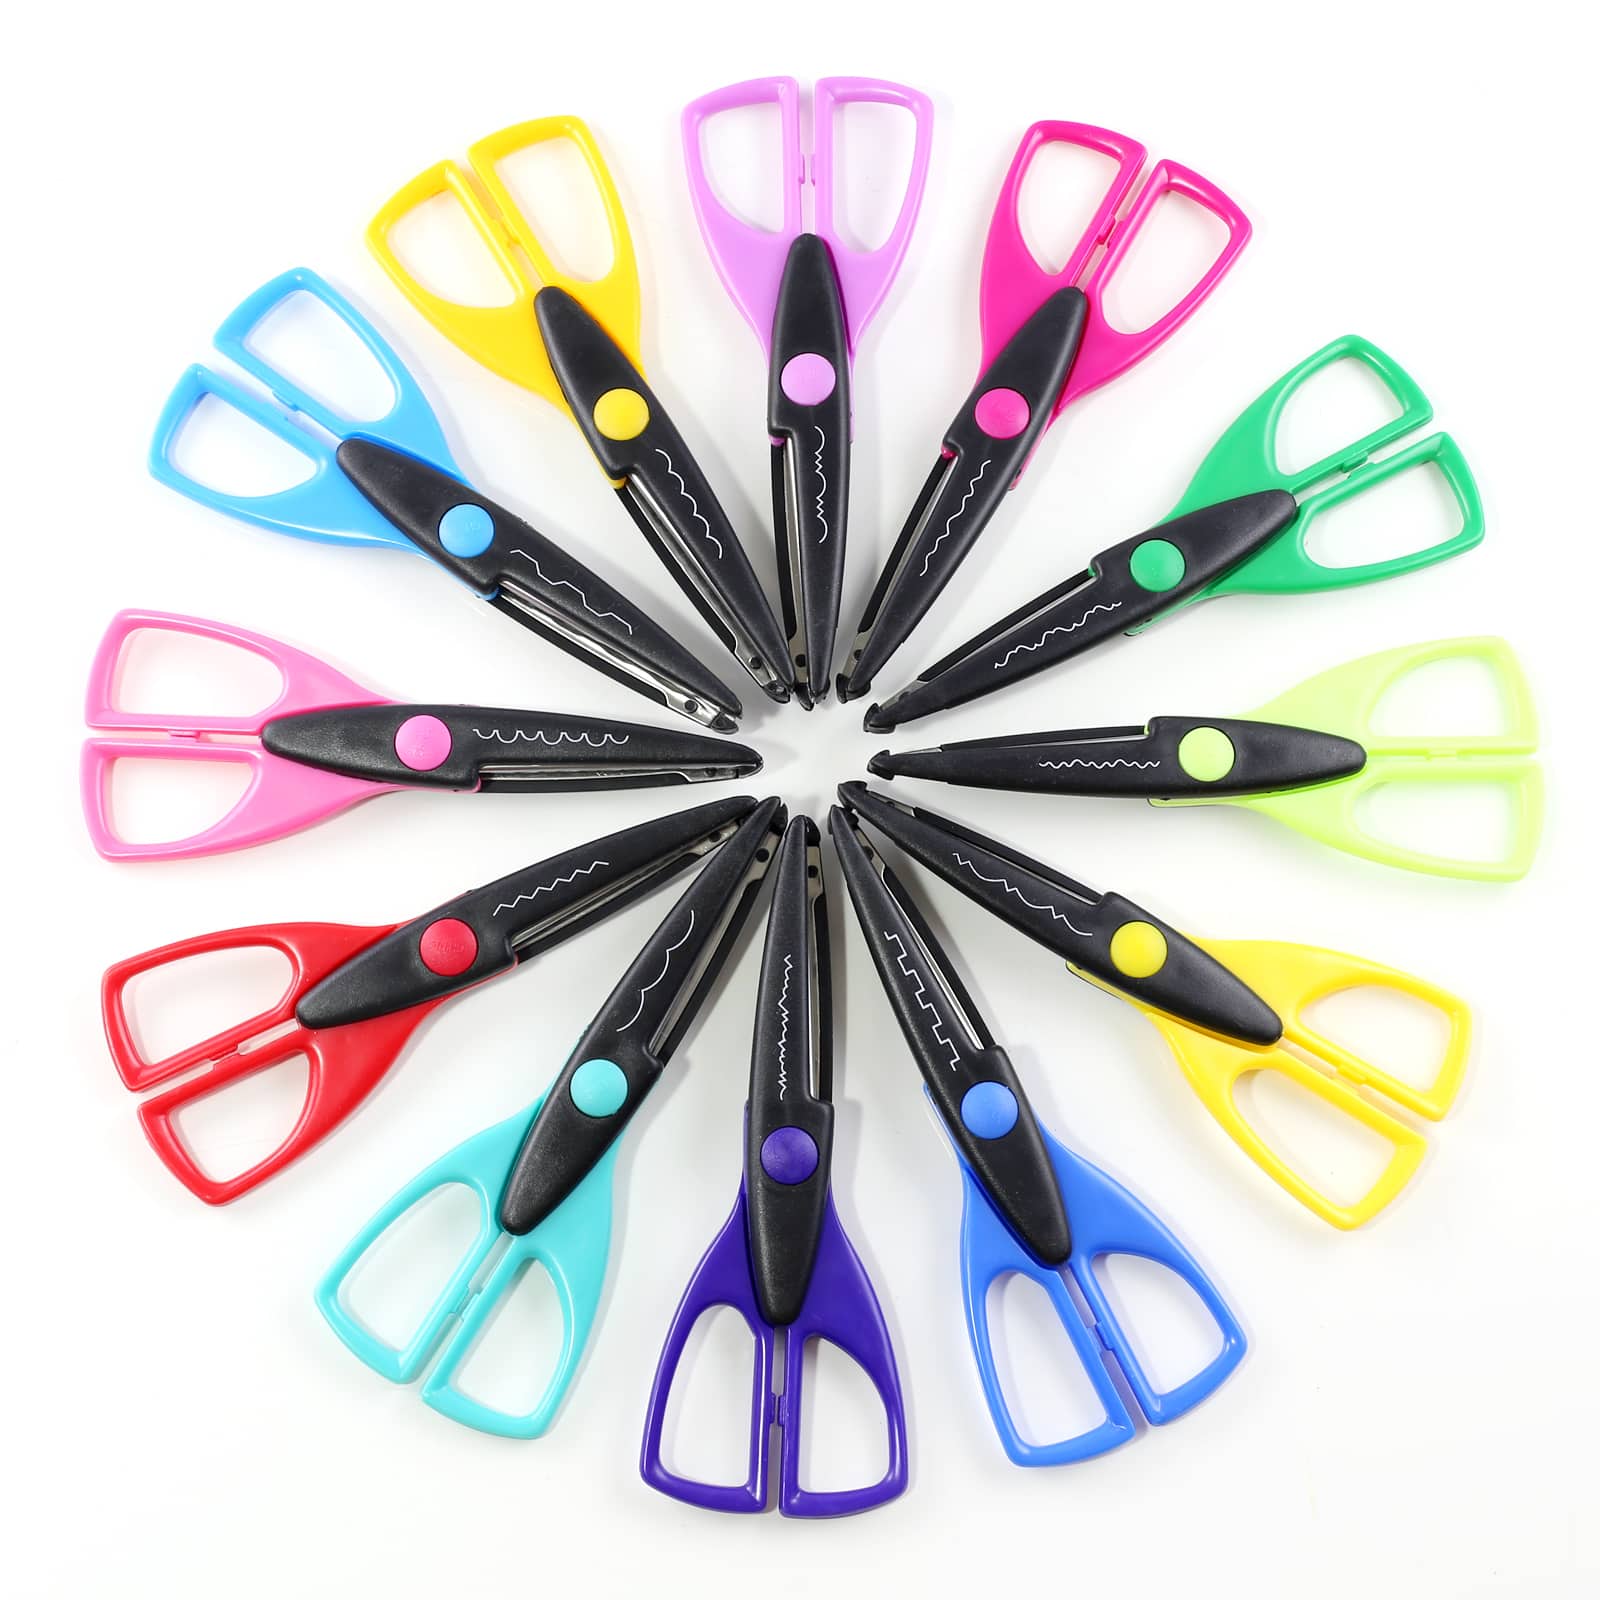 12 Packs: 12 ct. (144 total) Decorative Scissors by Craft Smart